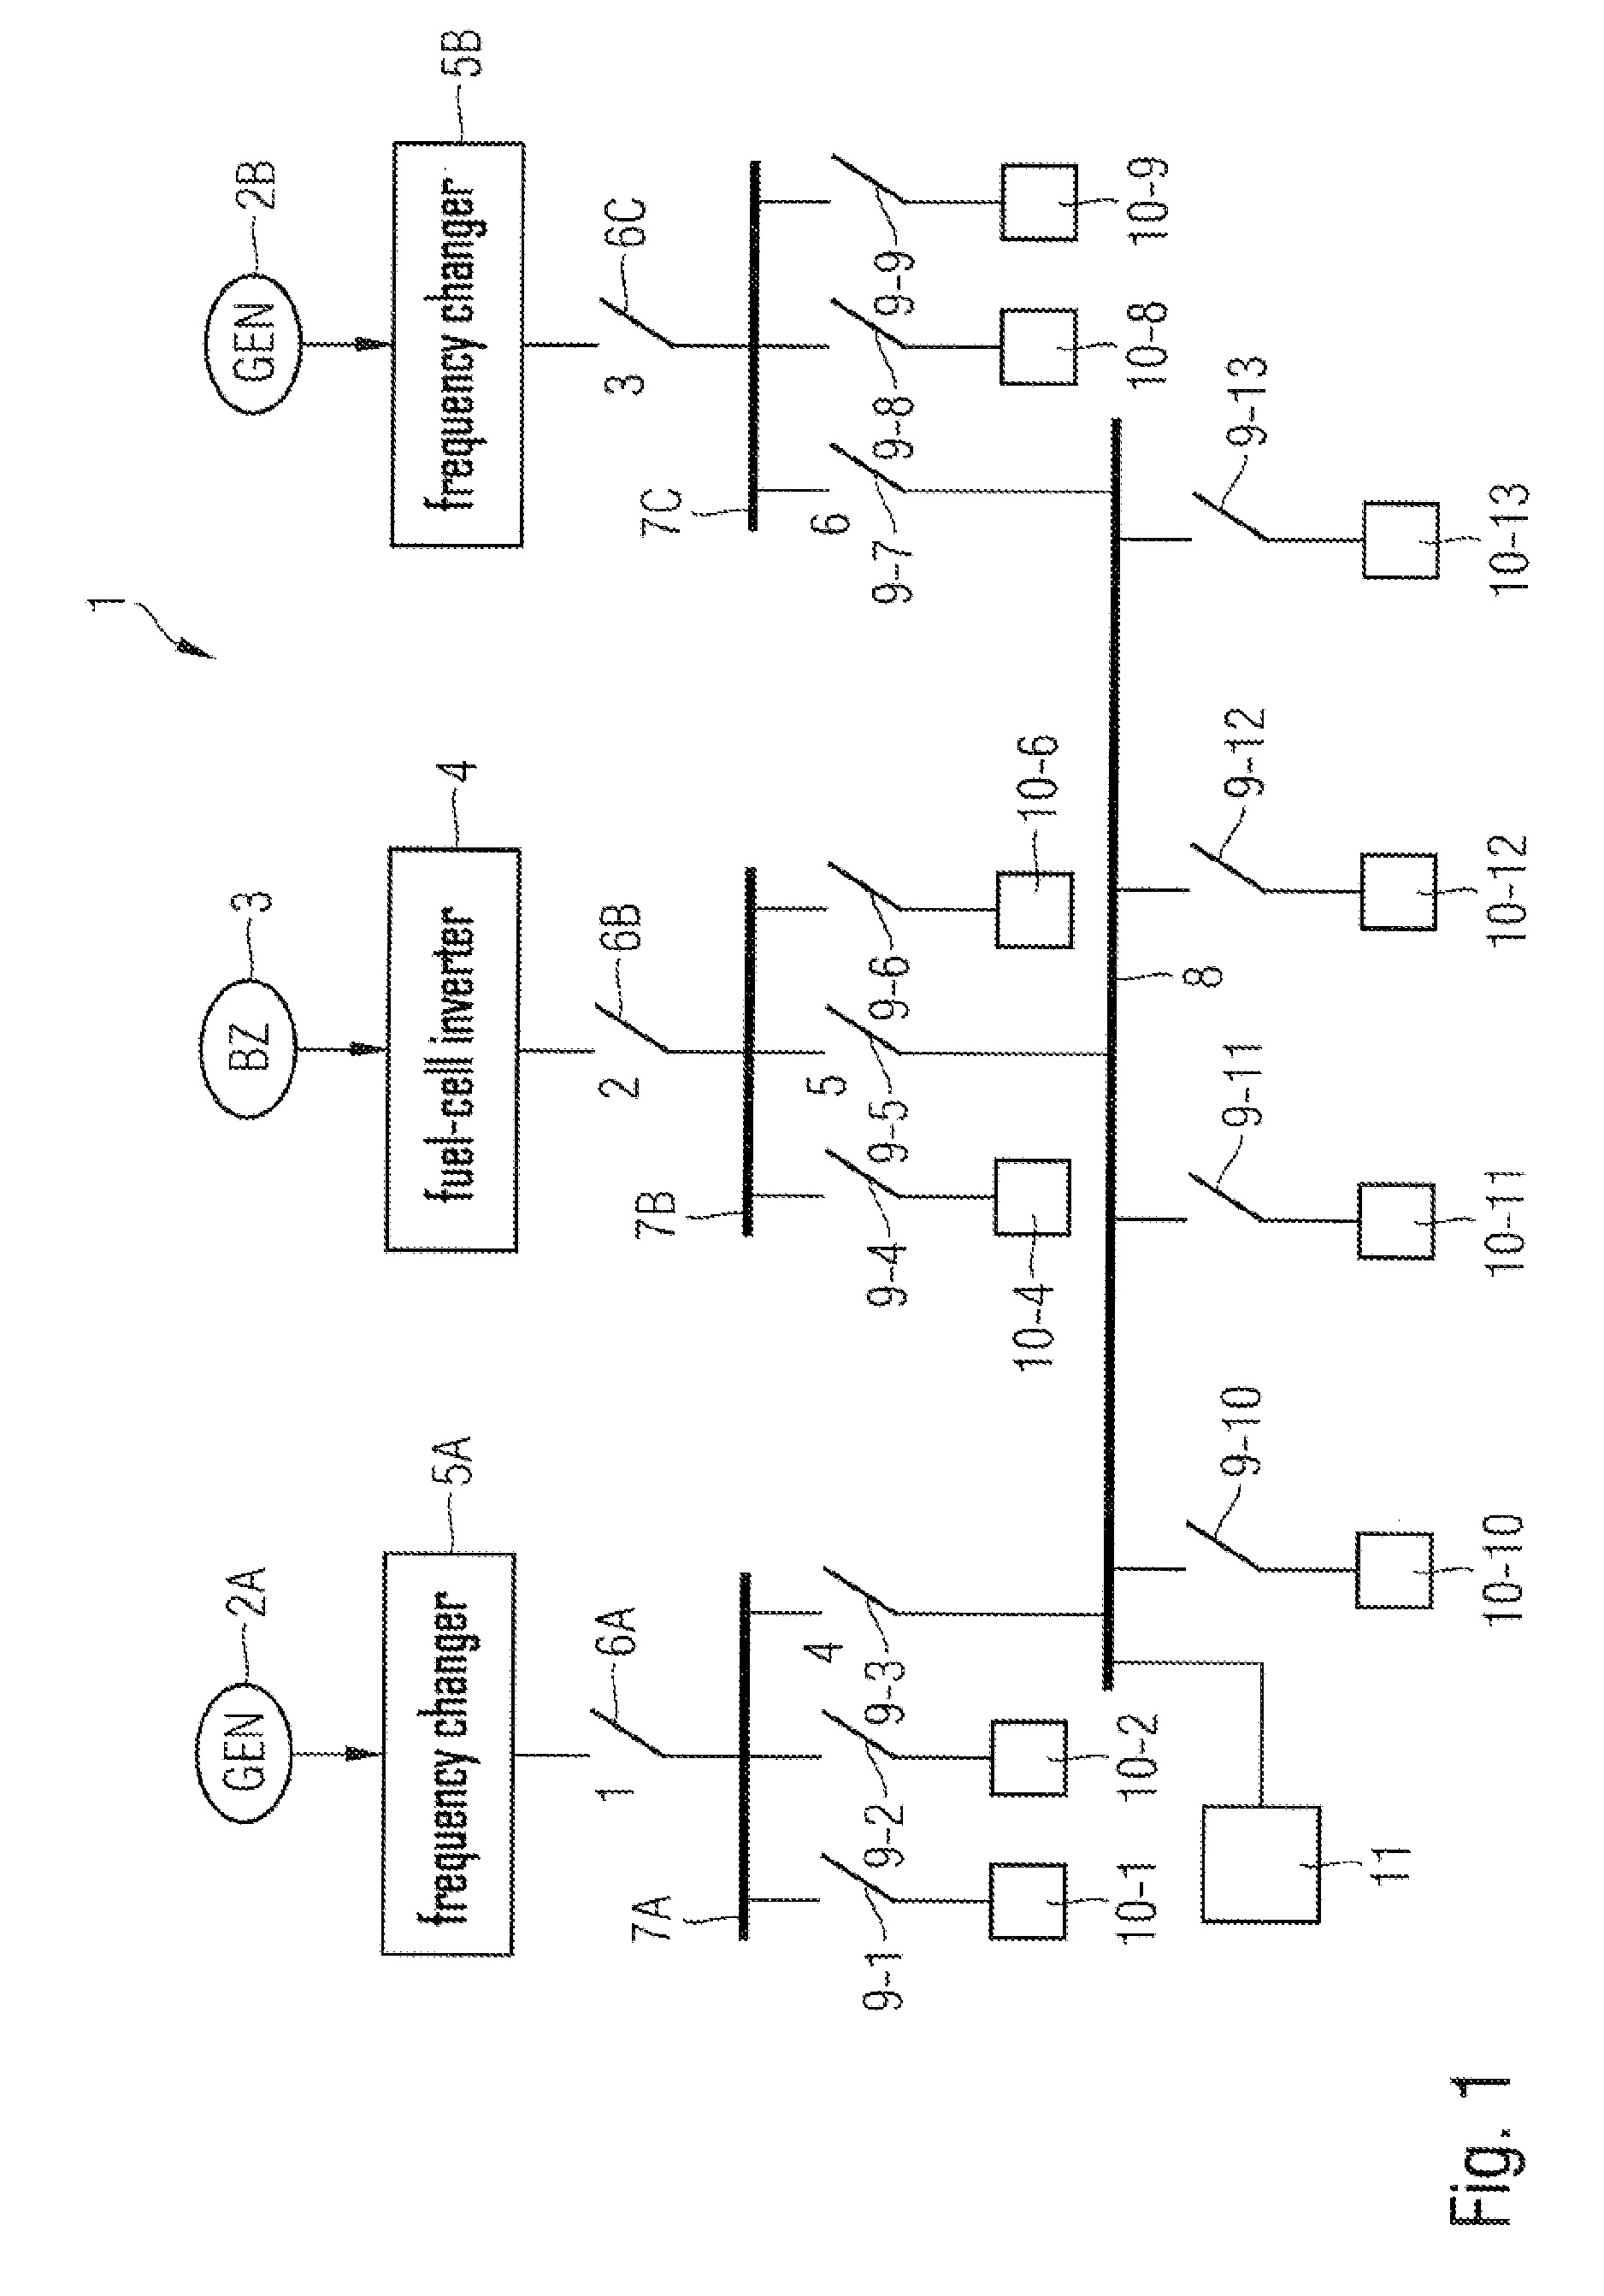 Method and device for providing an electrical system alternating voltage in an aircraft